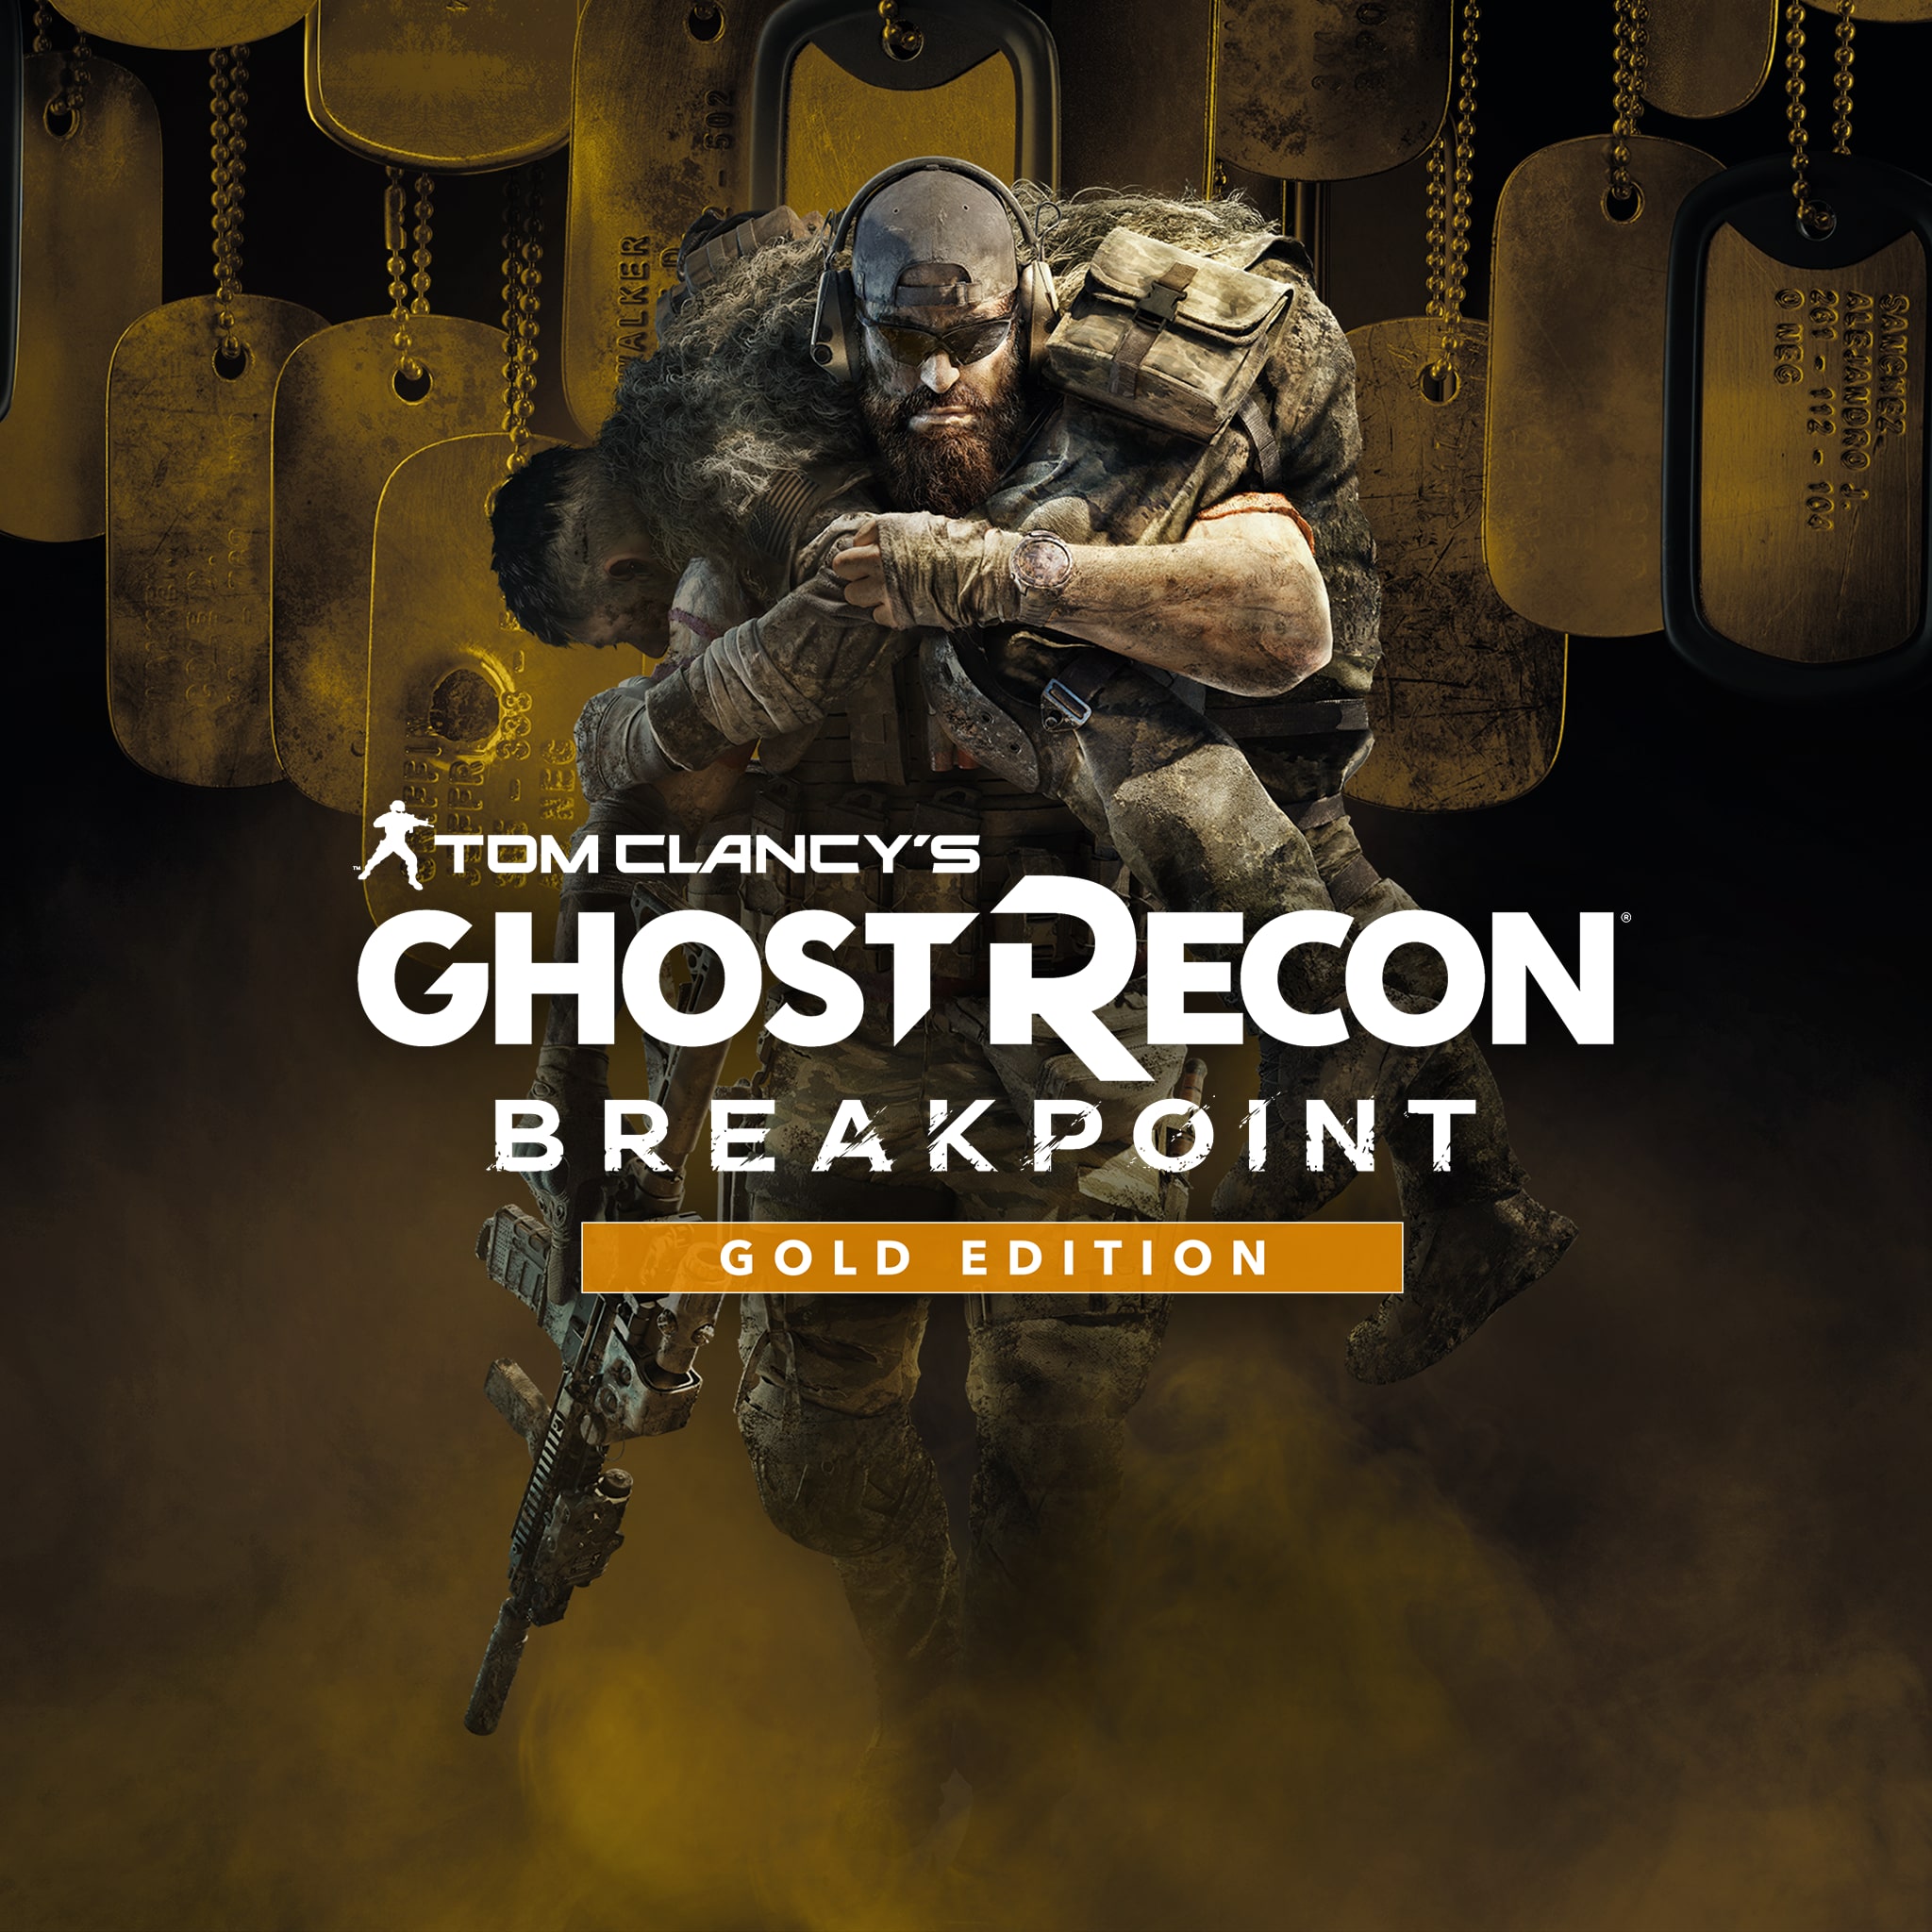 ghost recon playstation store